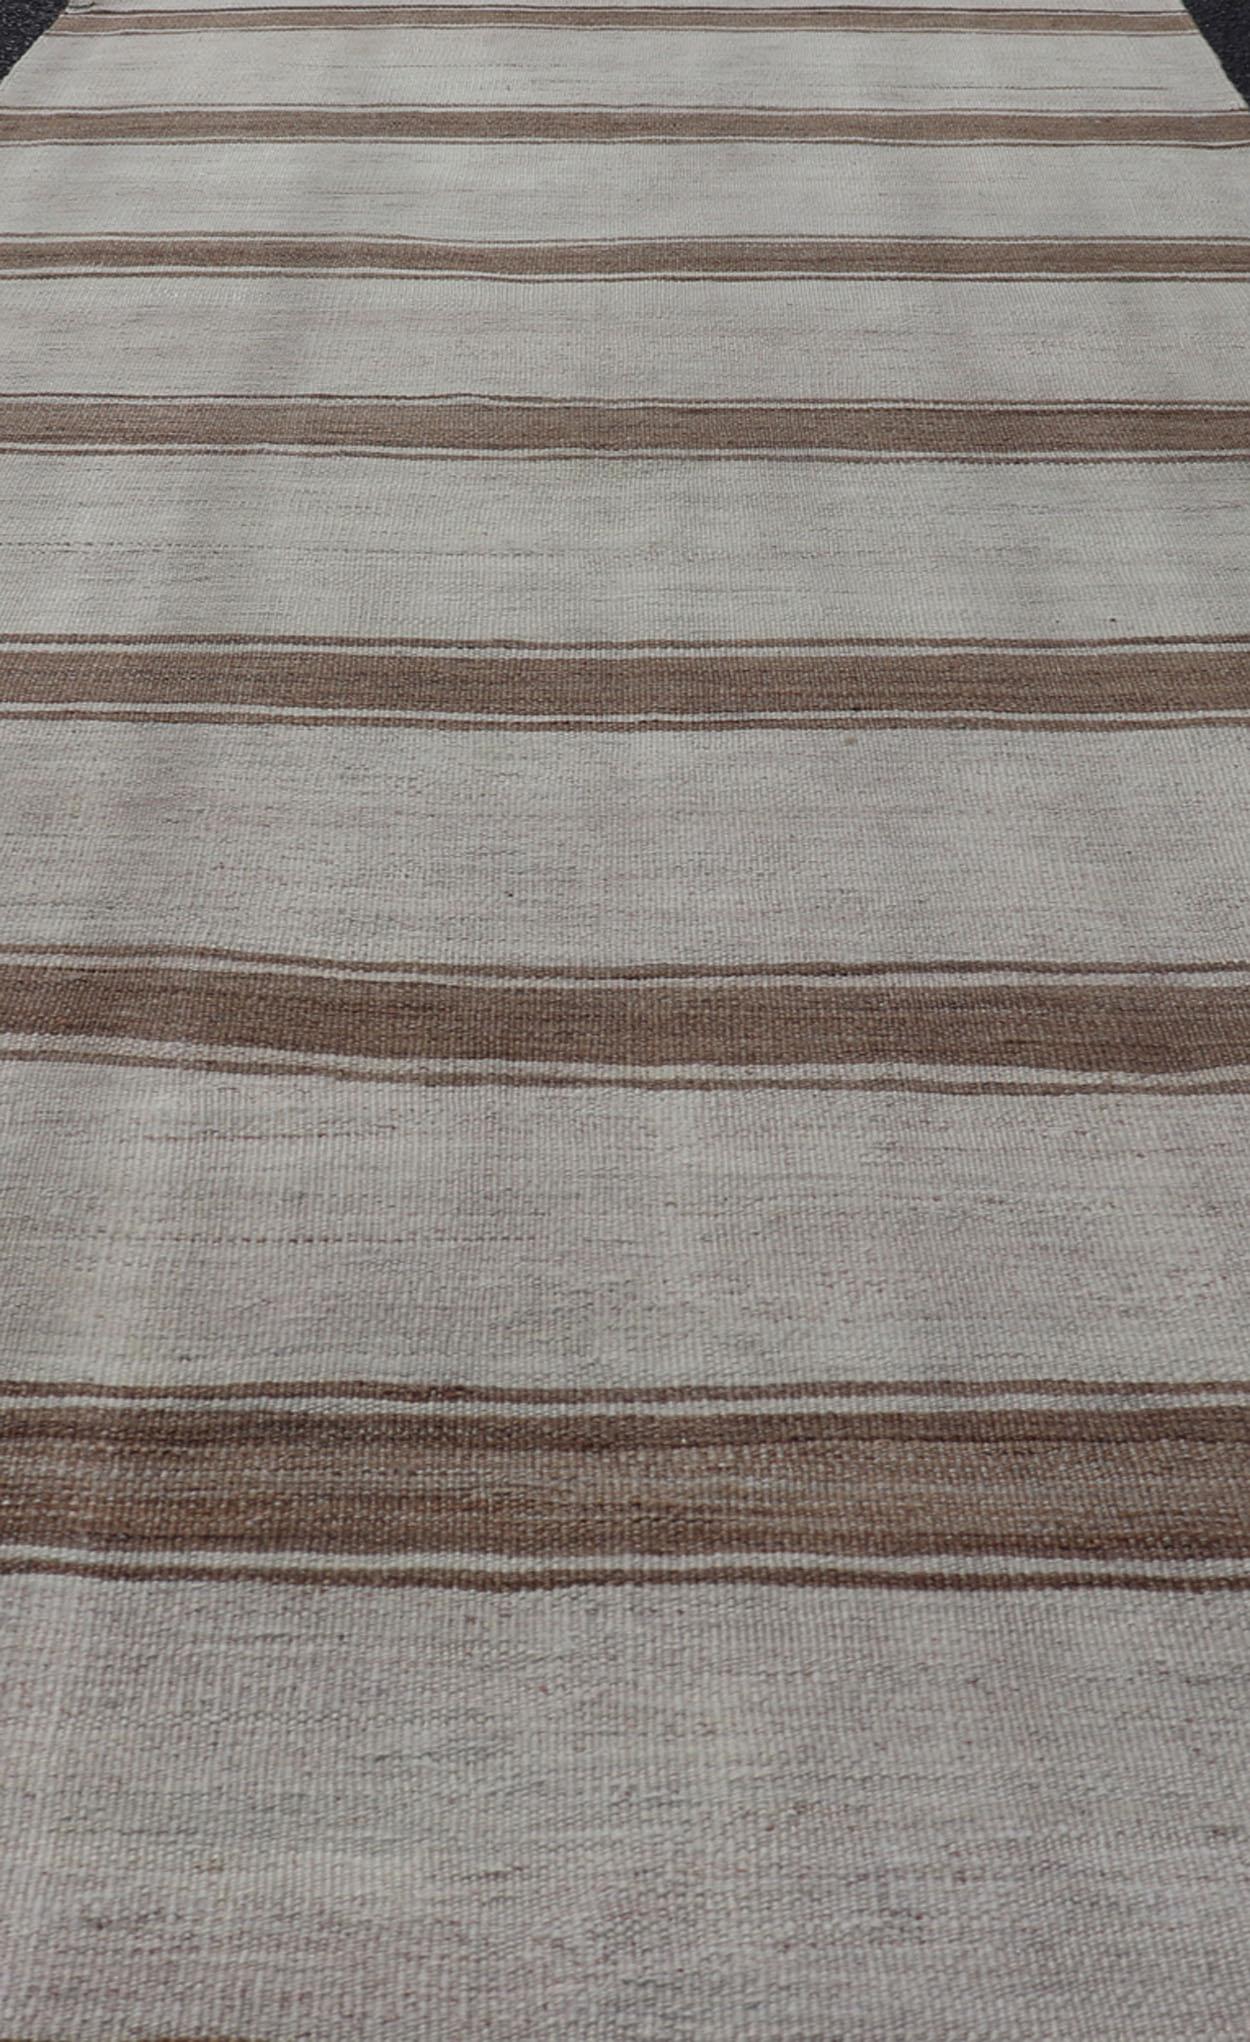 Minimalist Design Vintage Turkish Kilim Runner with Grey, Brown and Taupe For Sale 1